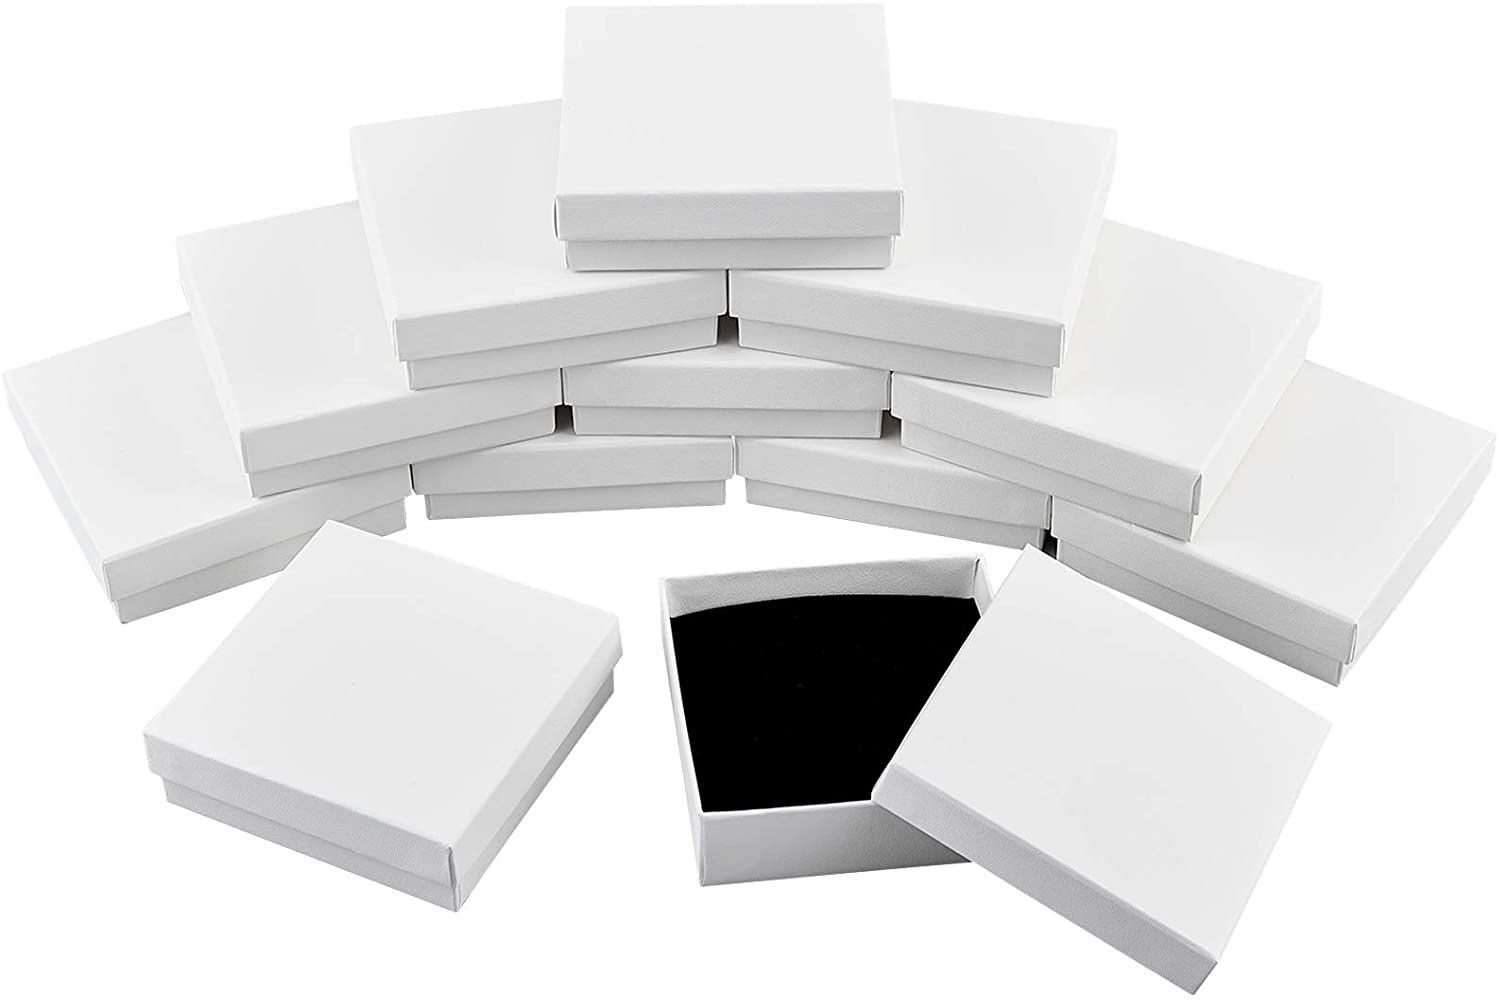 NBEADS 12 Pcs Cardboard Jewelry Box White Square Paper Gift Case for ...